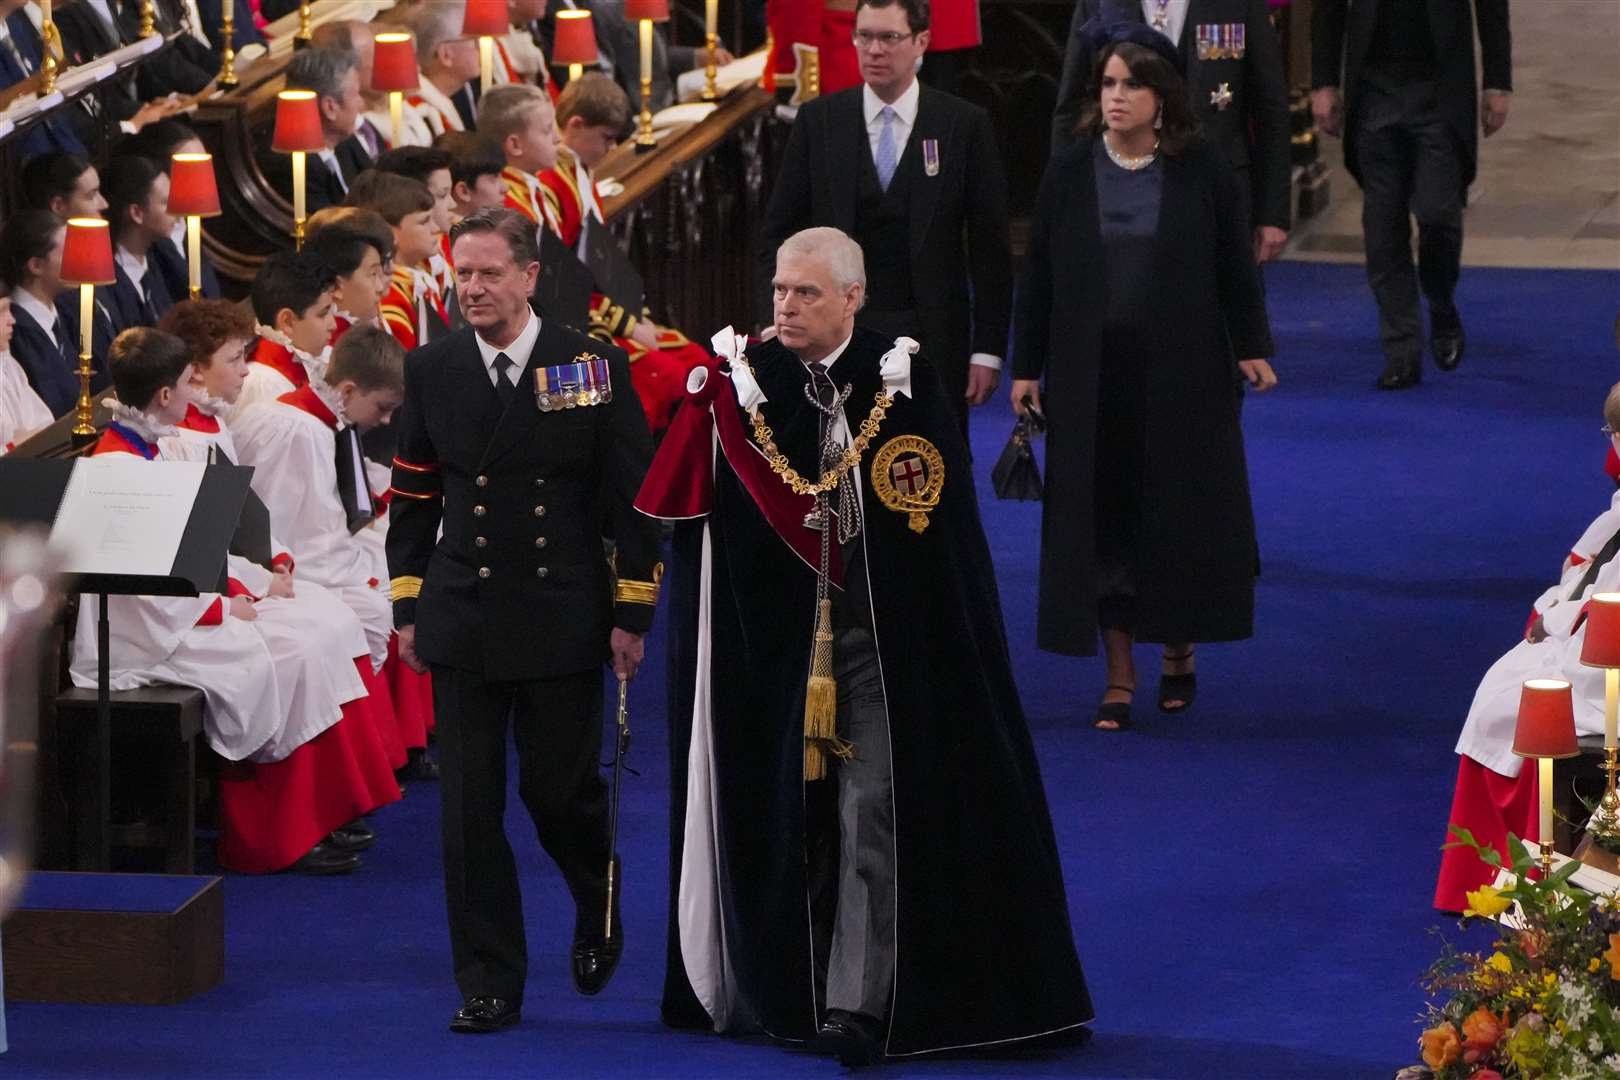 The Duke of York (right) attending the King and Queen’s coronation ceremony in May (Aaron Chown/PA)